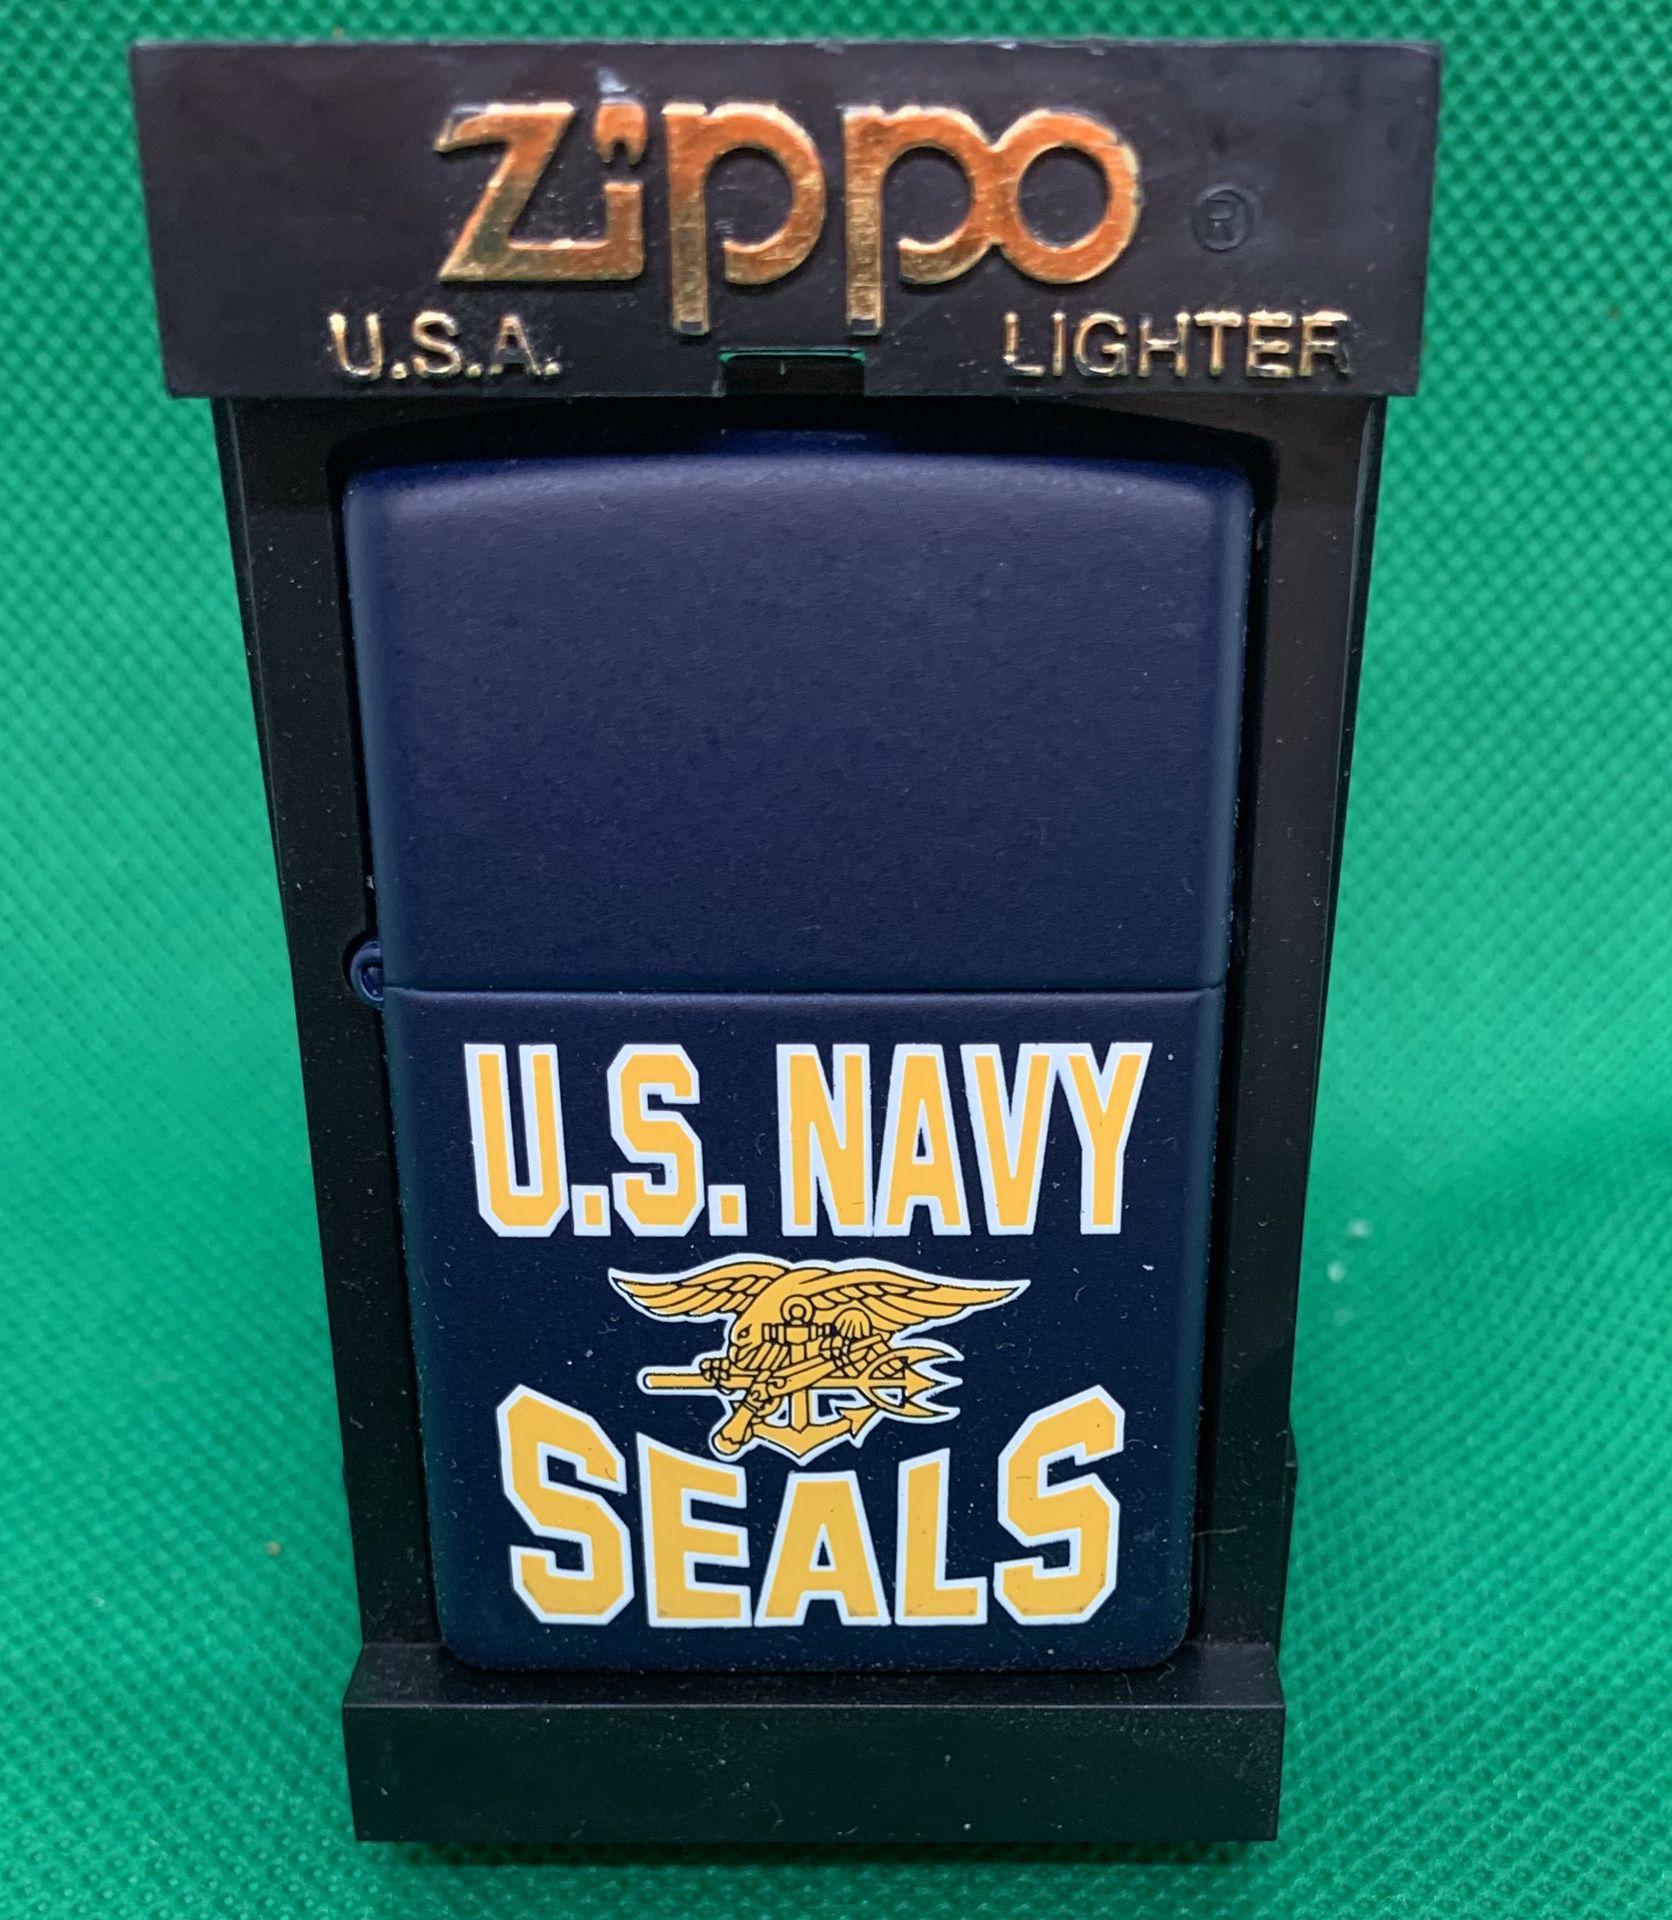 Zippo Lighter Navy Seals, never opened or used